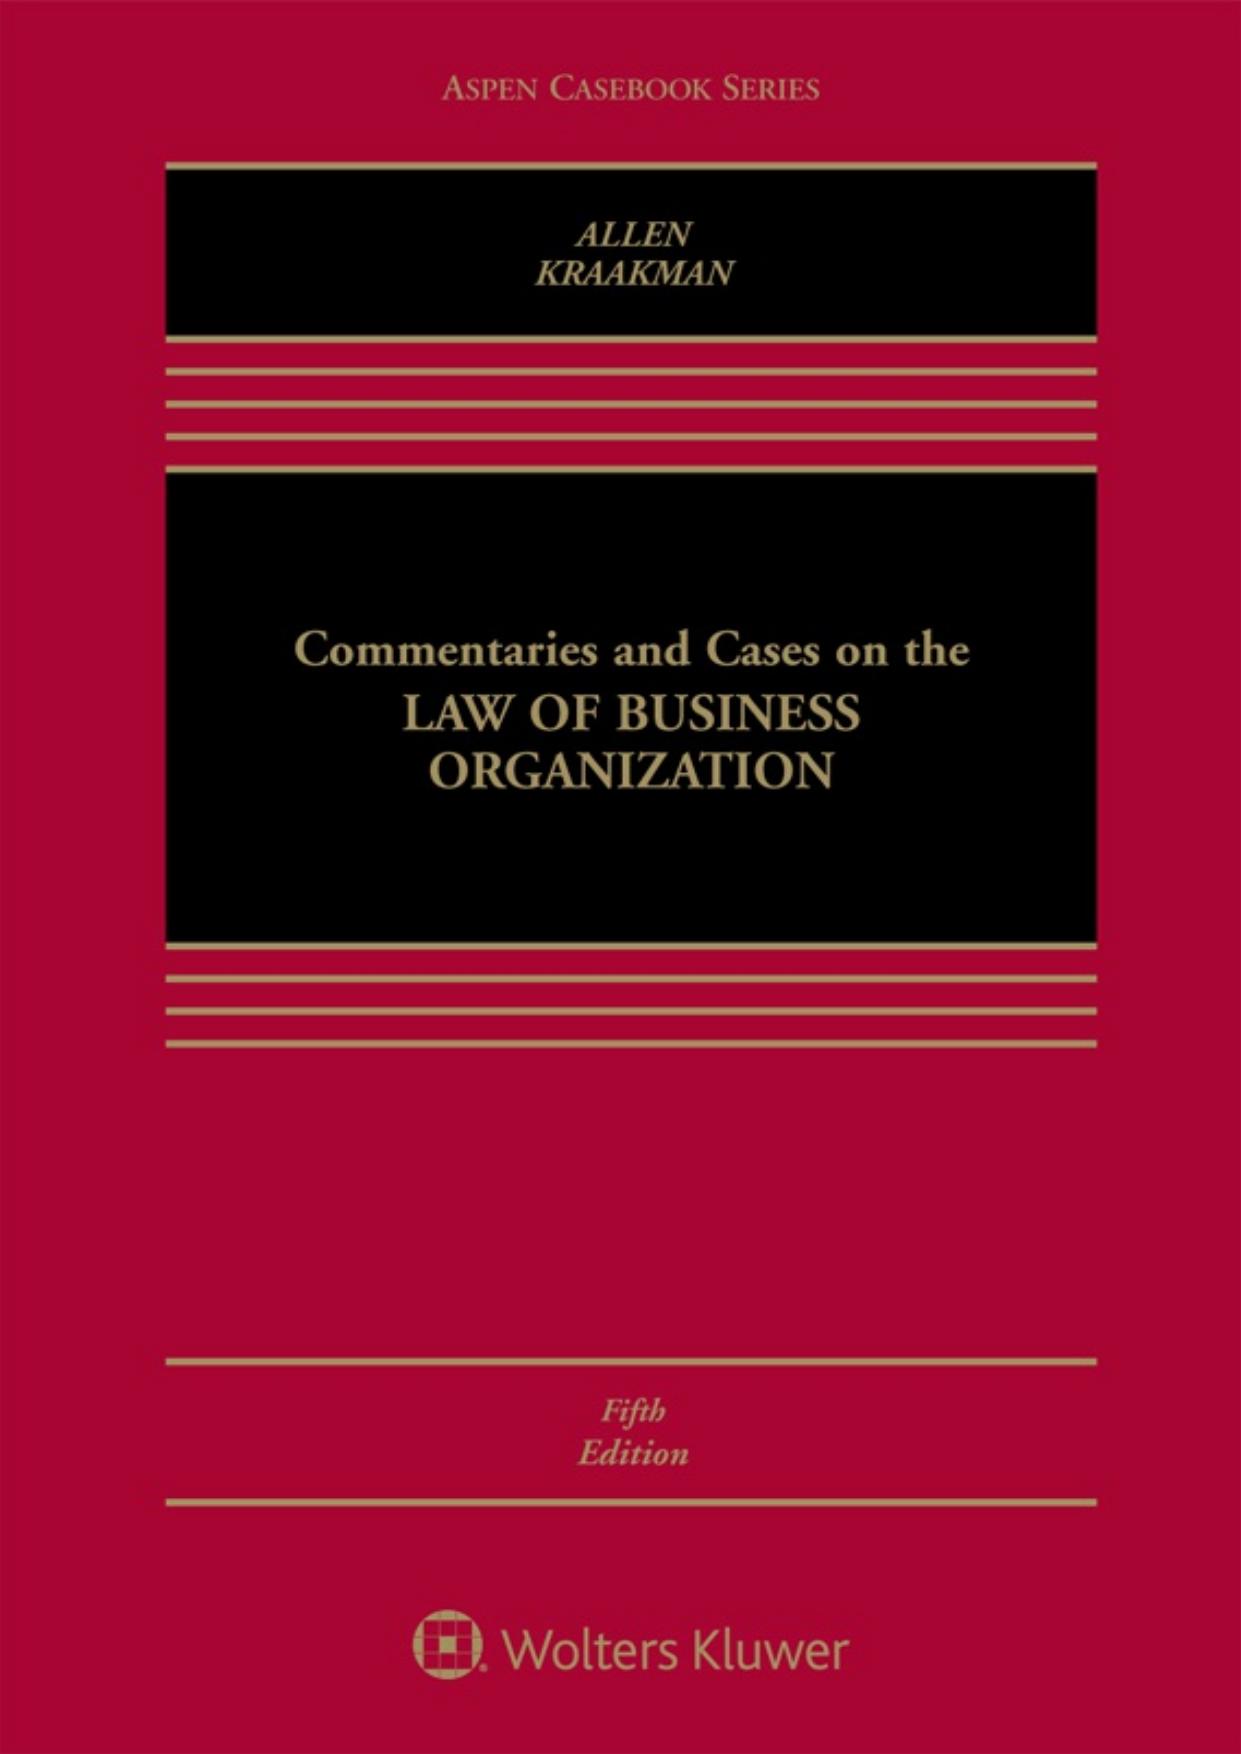 Commentaries and Cases on the Law of Business Organization 5th Edition - Allen, William T. & Kraakman, Reinier.jpg